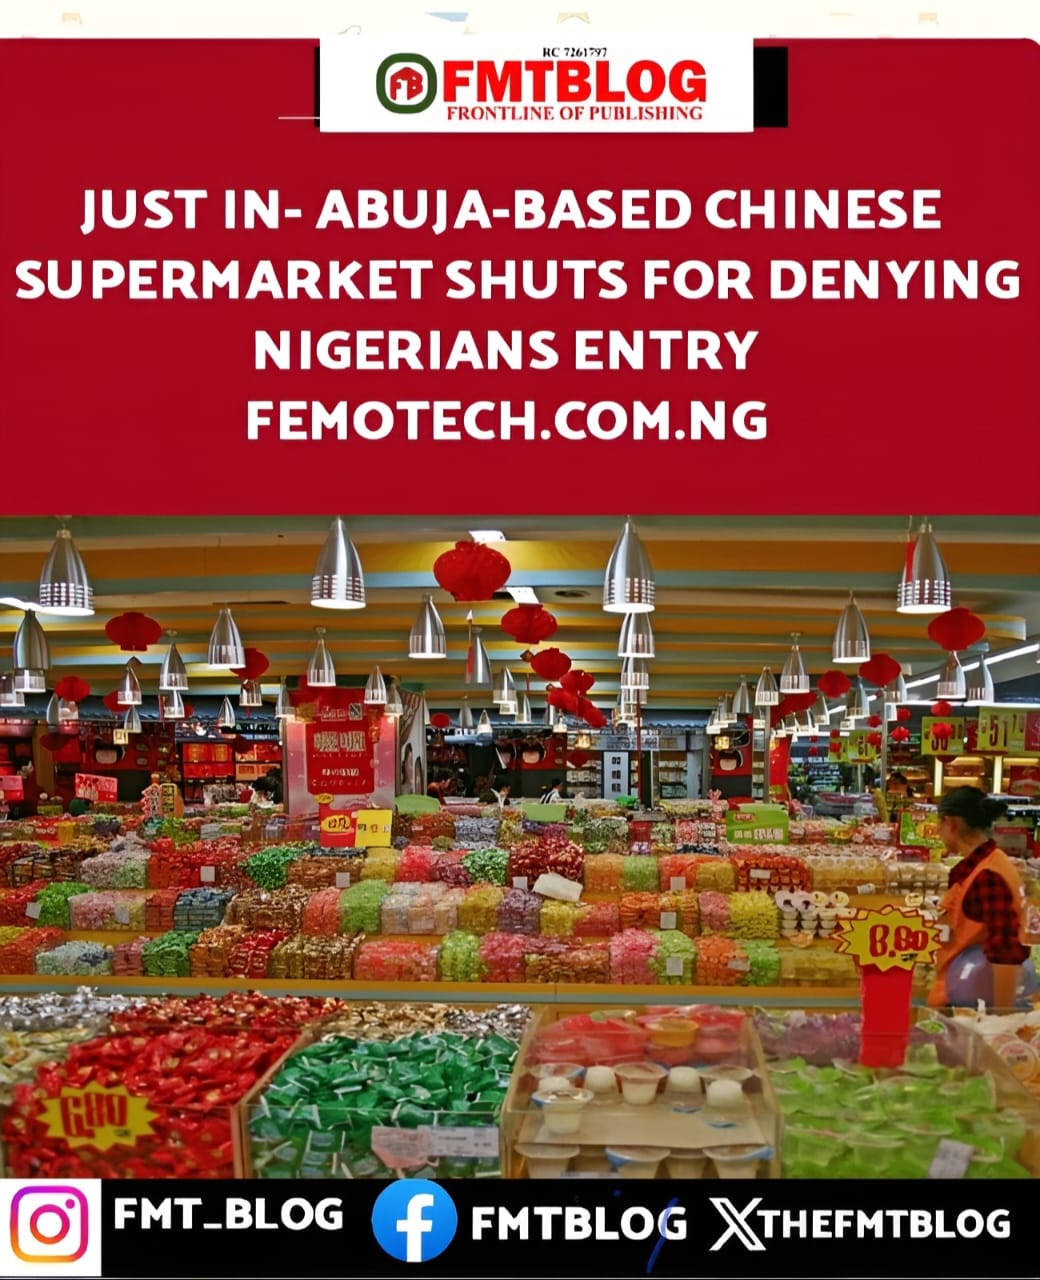 JUST IN- Abuja-Based Chinese Supermarket Shuts For Denying Nigerians Entry